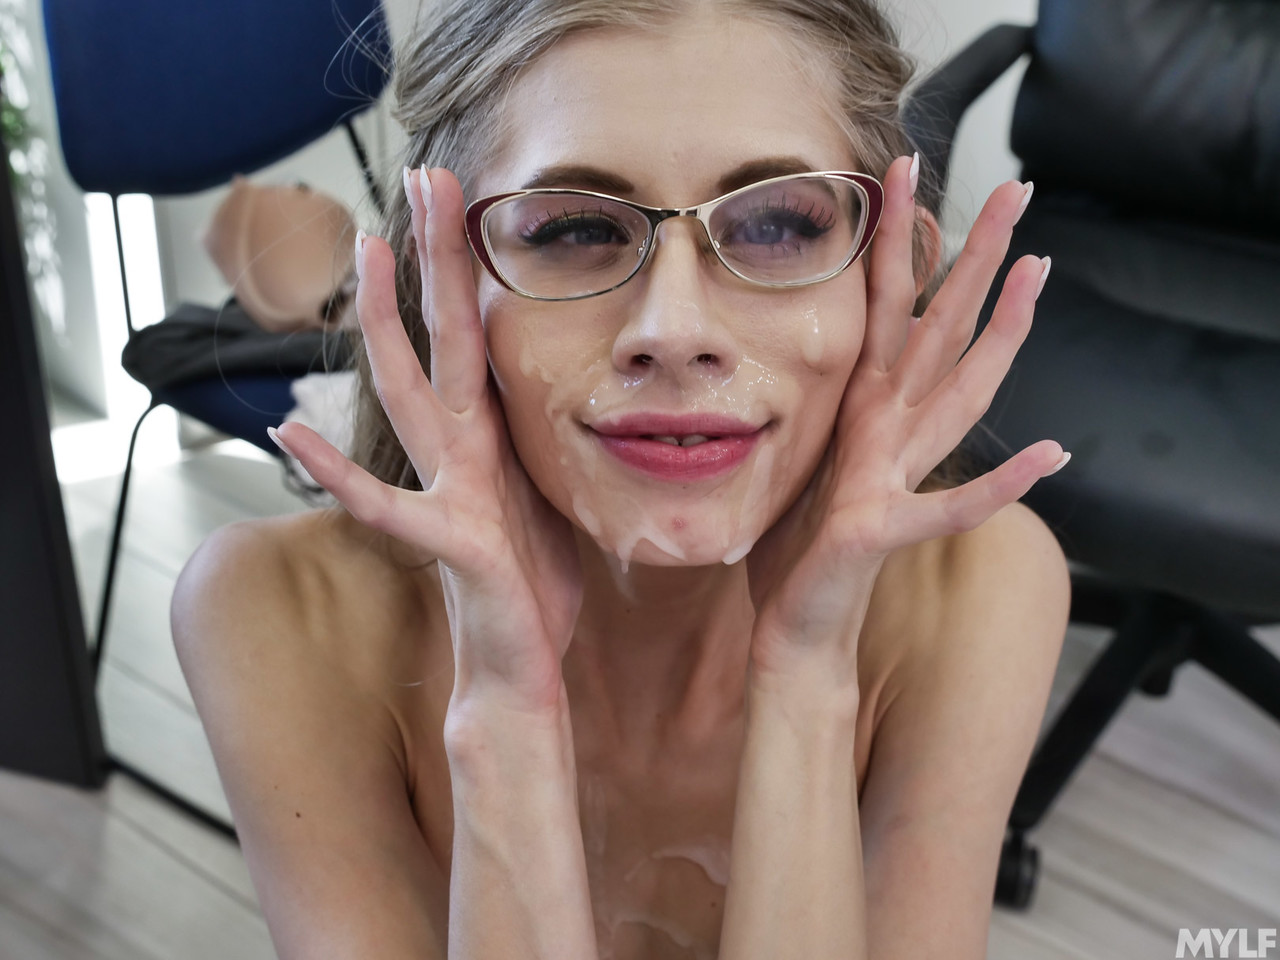 Secretary Kyaa Chimera shows her long legs and gets a facial after office sex porn photo #422605943 | MYLF Pics, Kyaa Chimera, Mike Mancini, Facial, mobile porn